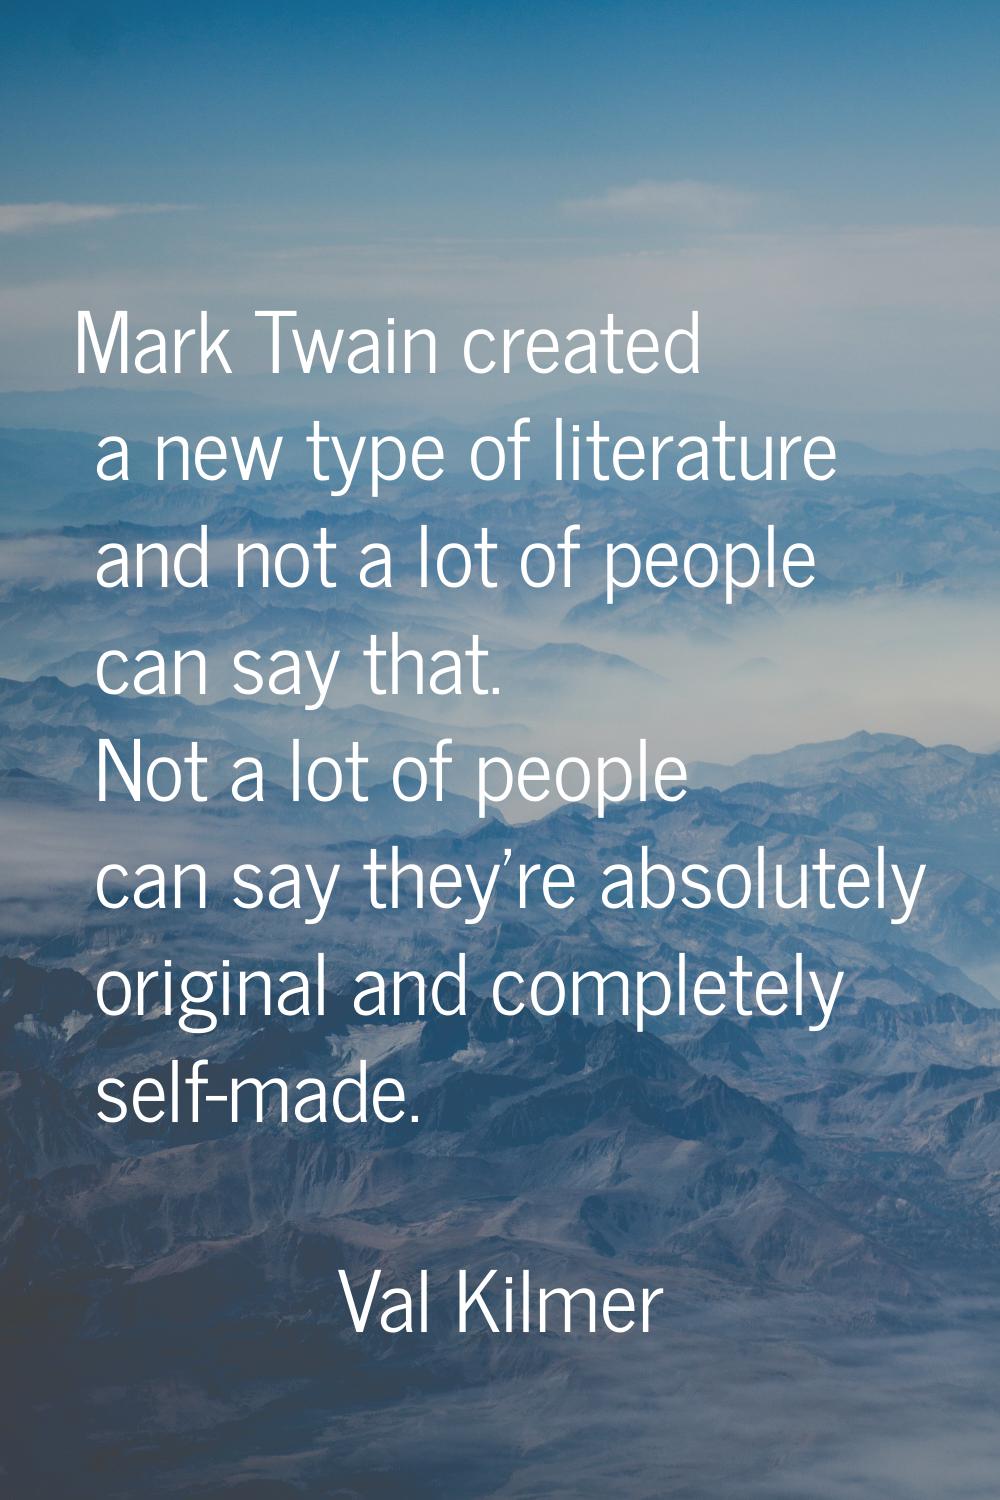 Mark Twain created a new type of literature and not a lot of people can say that. Not a lot of peop